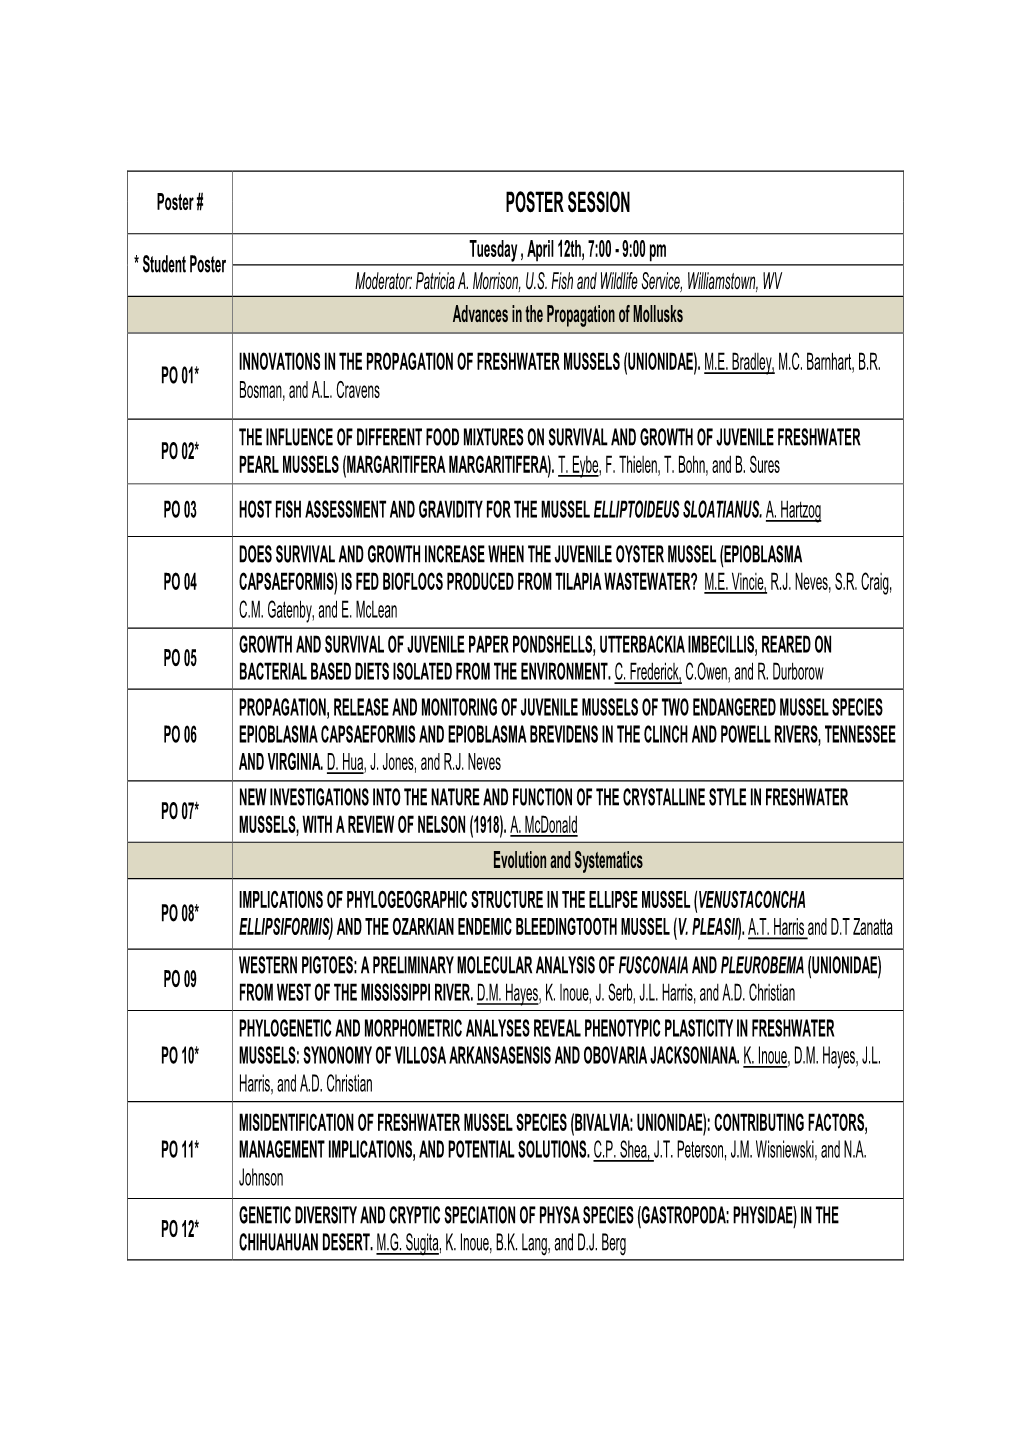 Poster Session Schedule